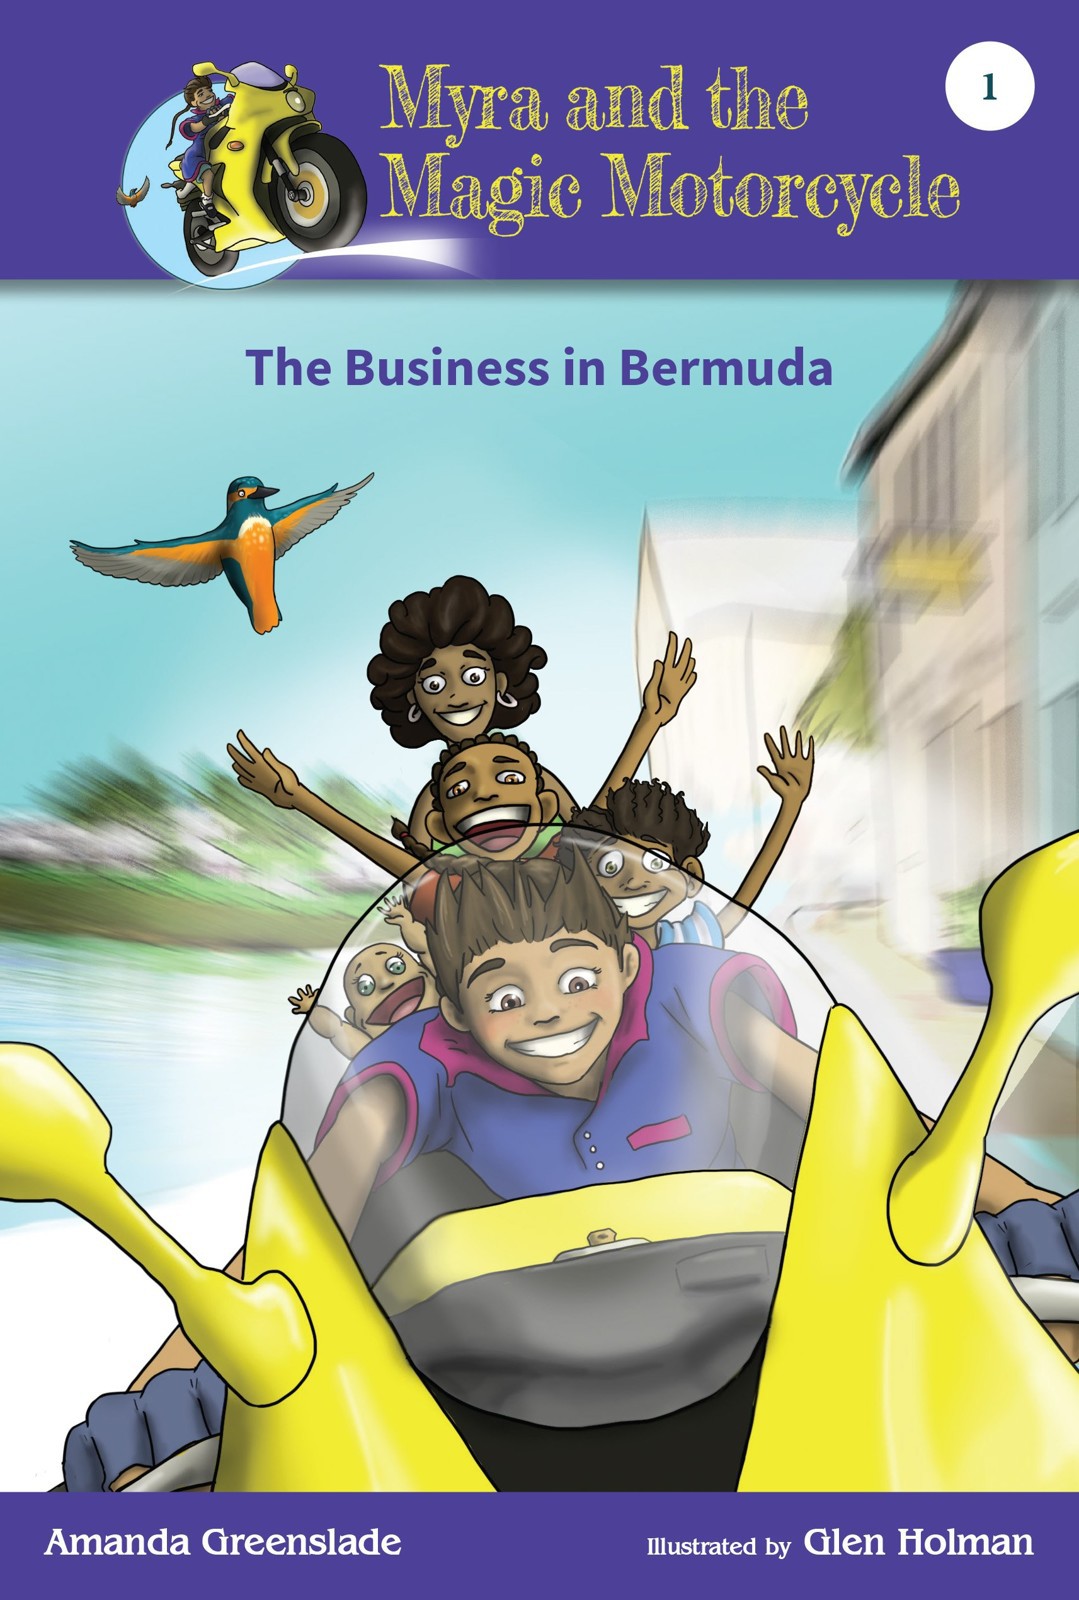 Myra and the Magic Motorcycle: The Business in Bermuda by Amanda Greenslade